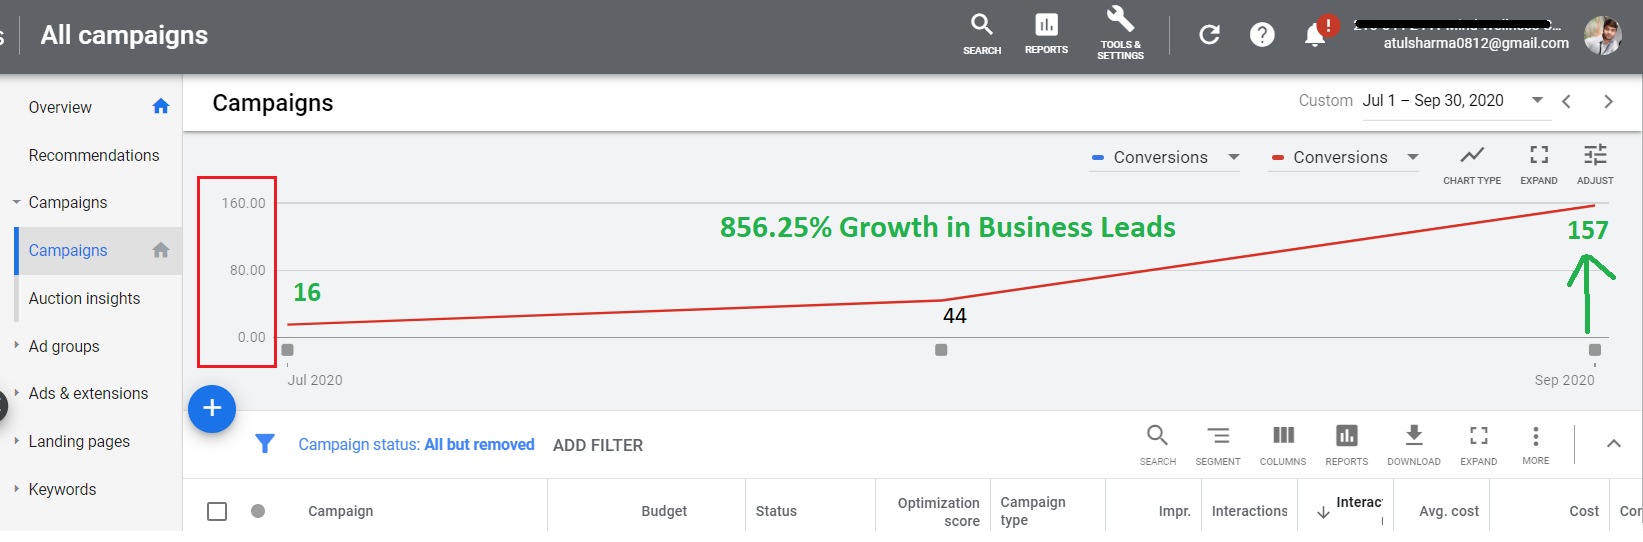 856.25% Growth in Business Leads for PPC Client